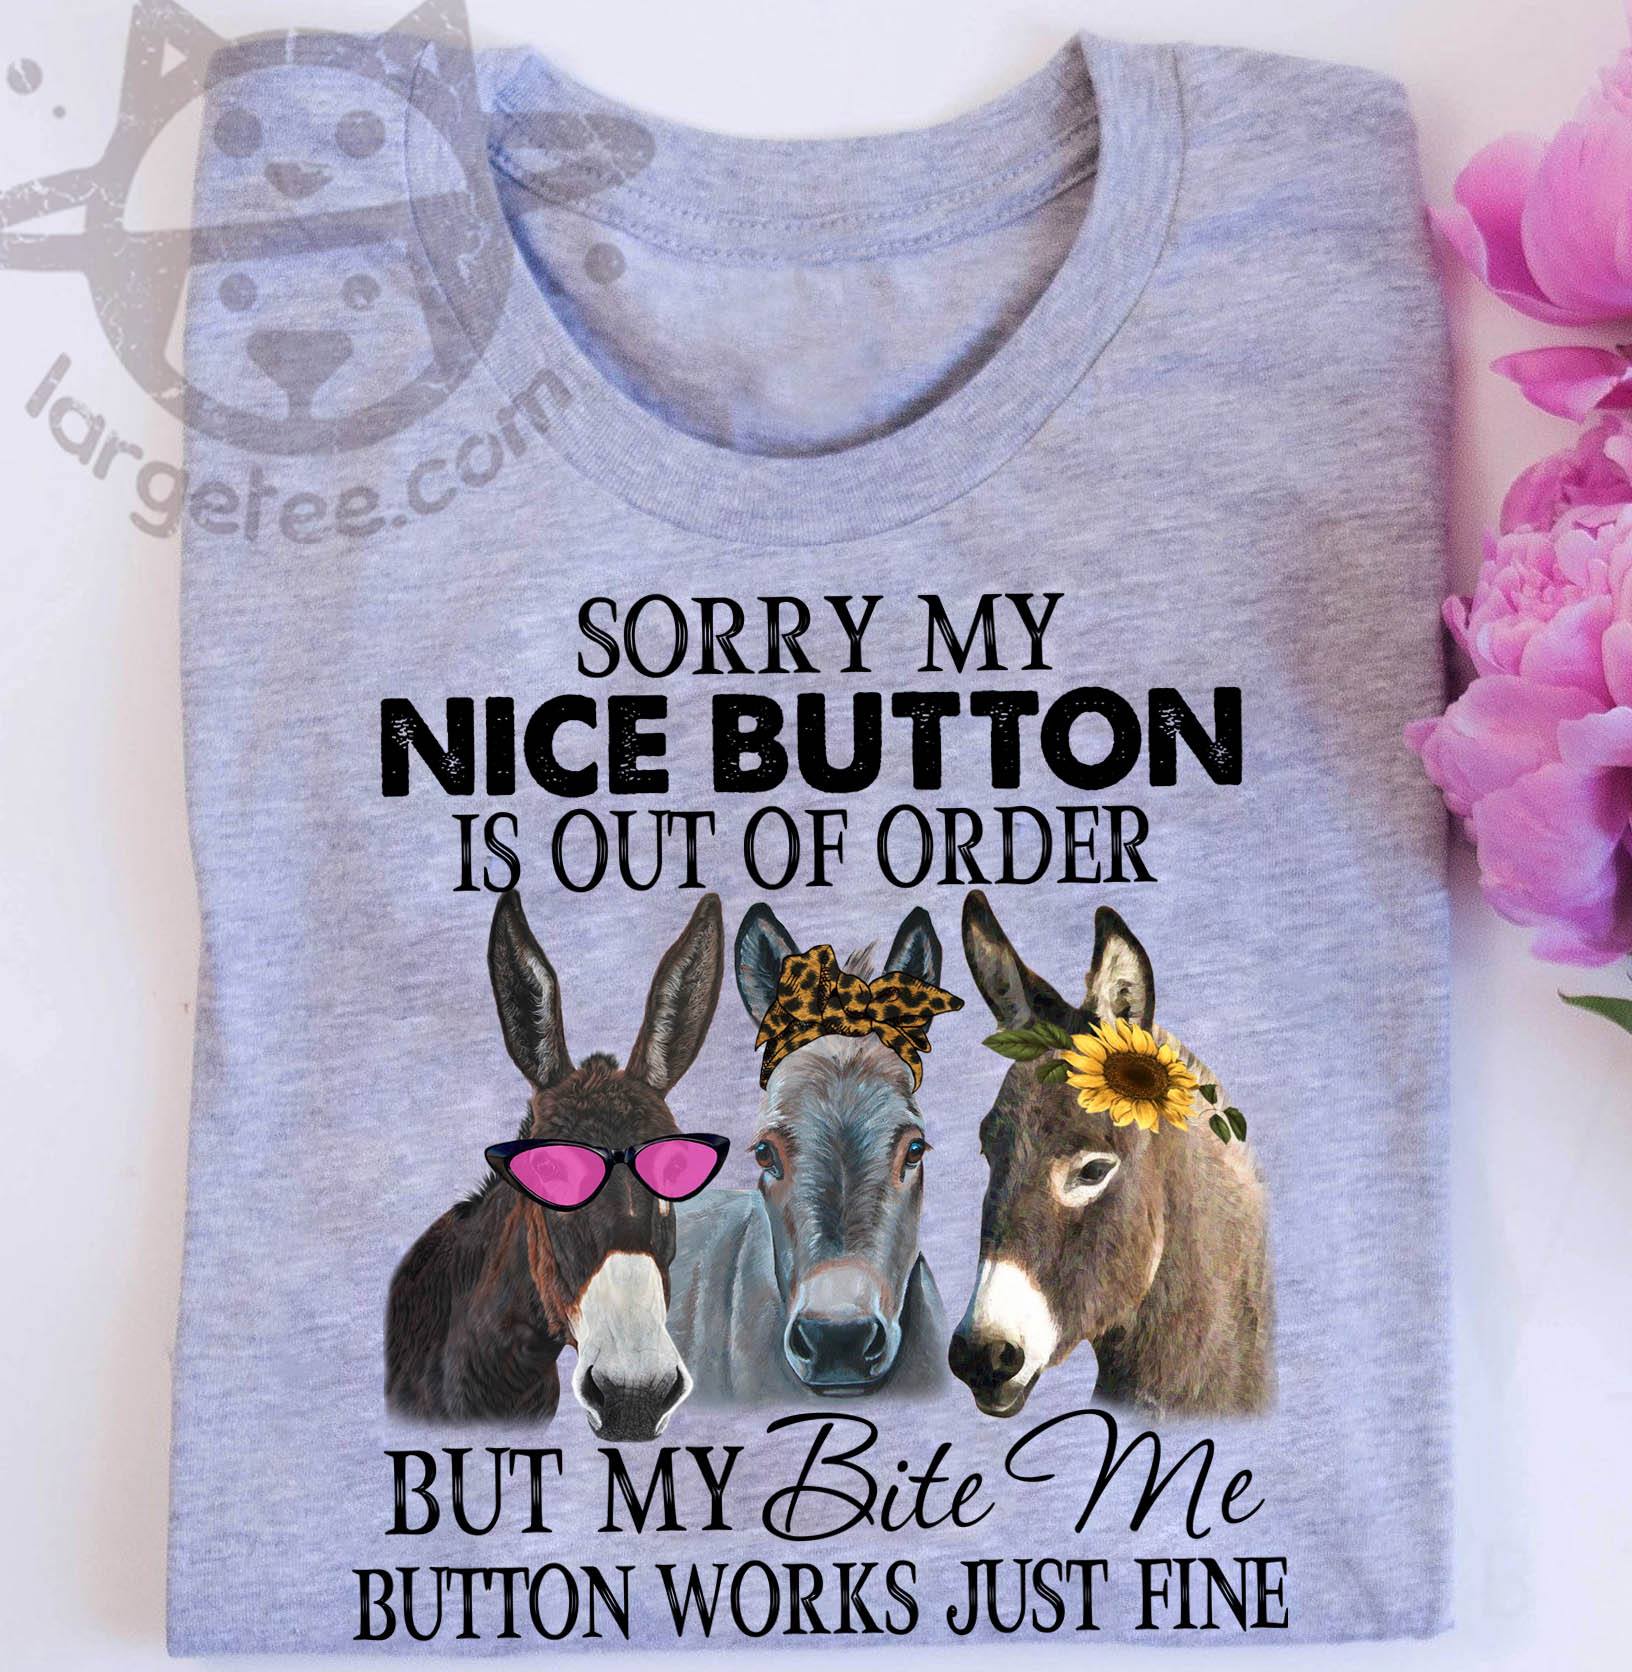 Sorry my nice button is out of order but my bite me button works just fine - Donkey